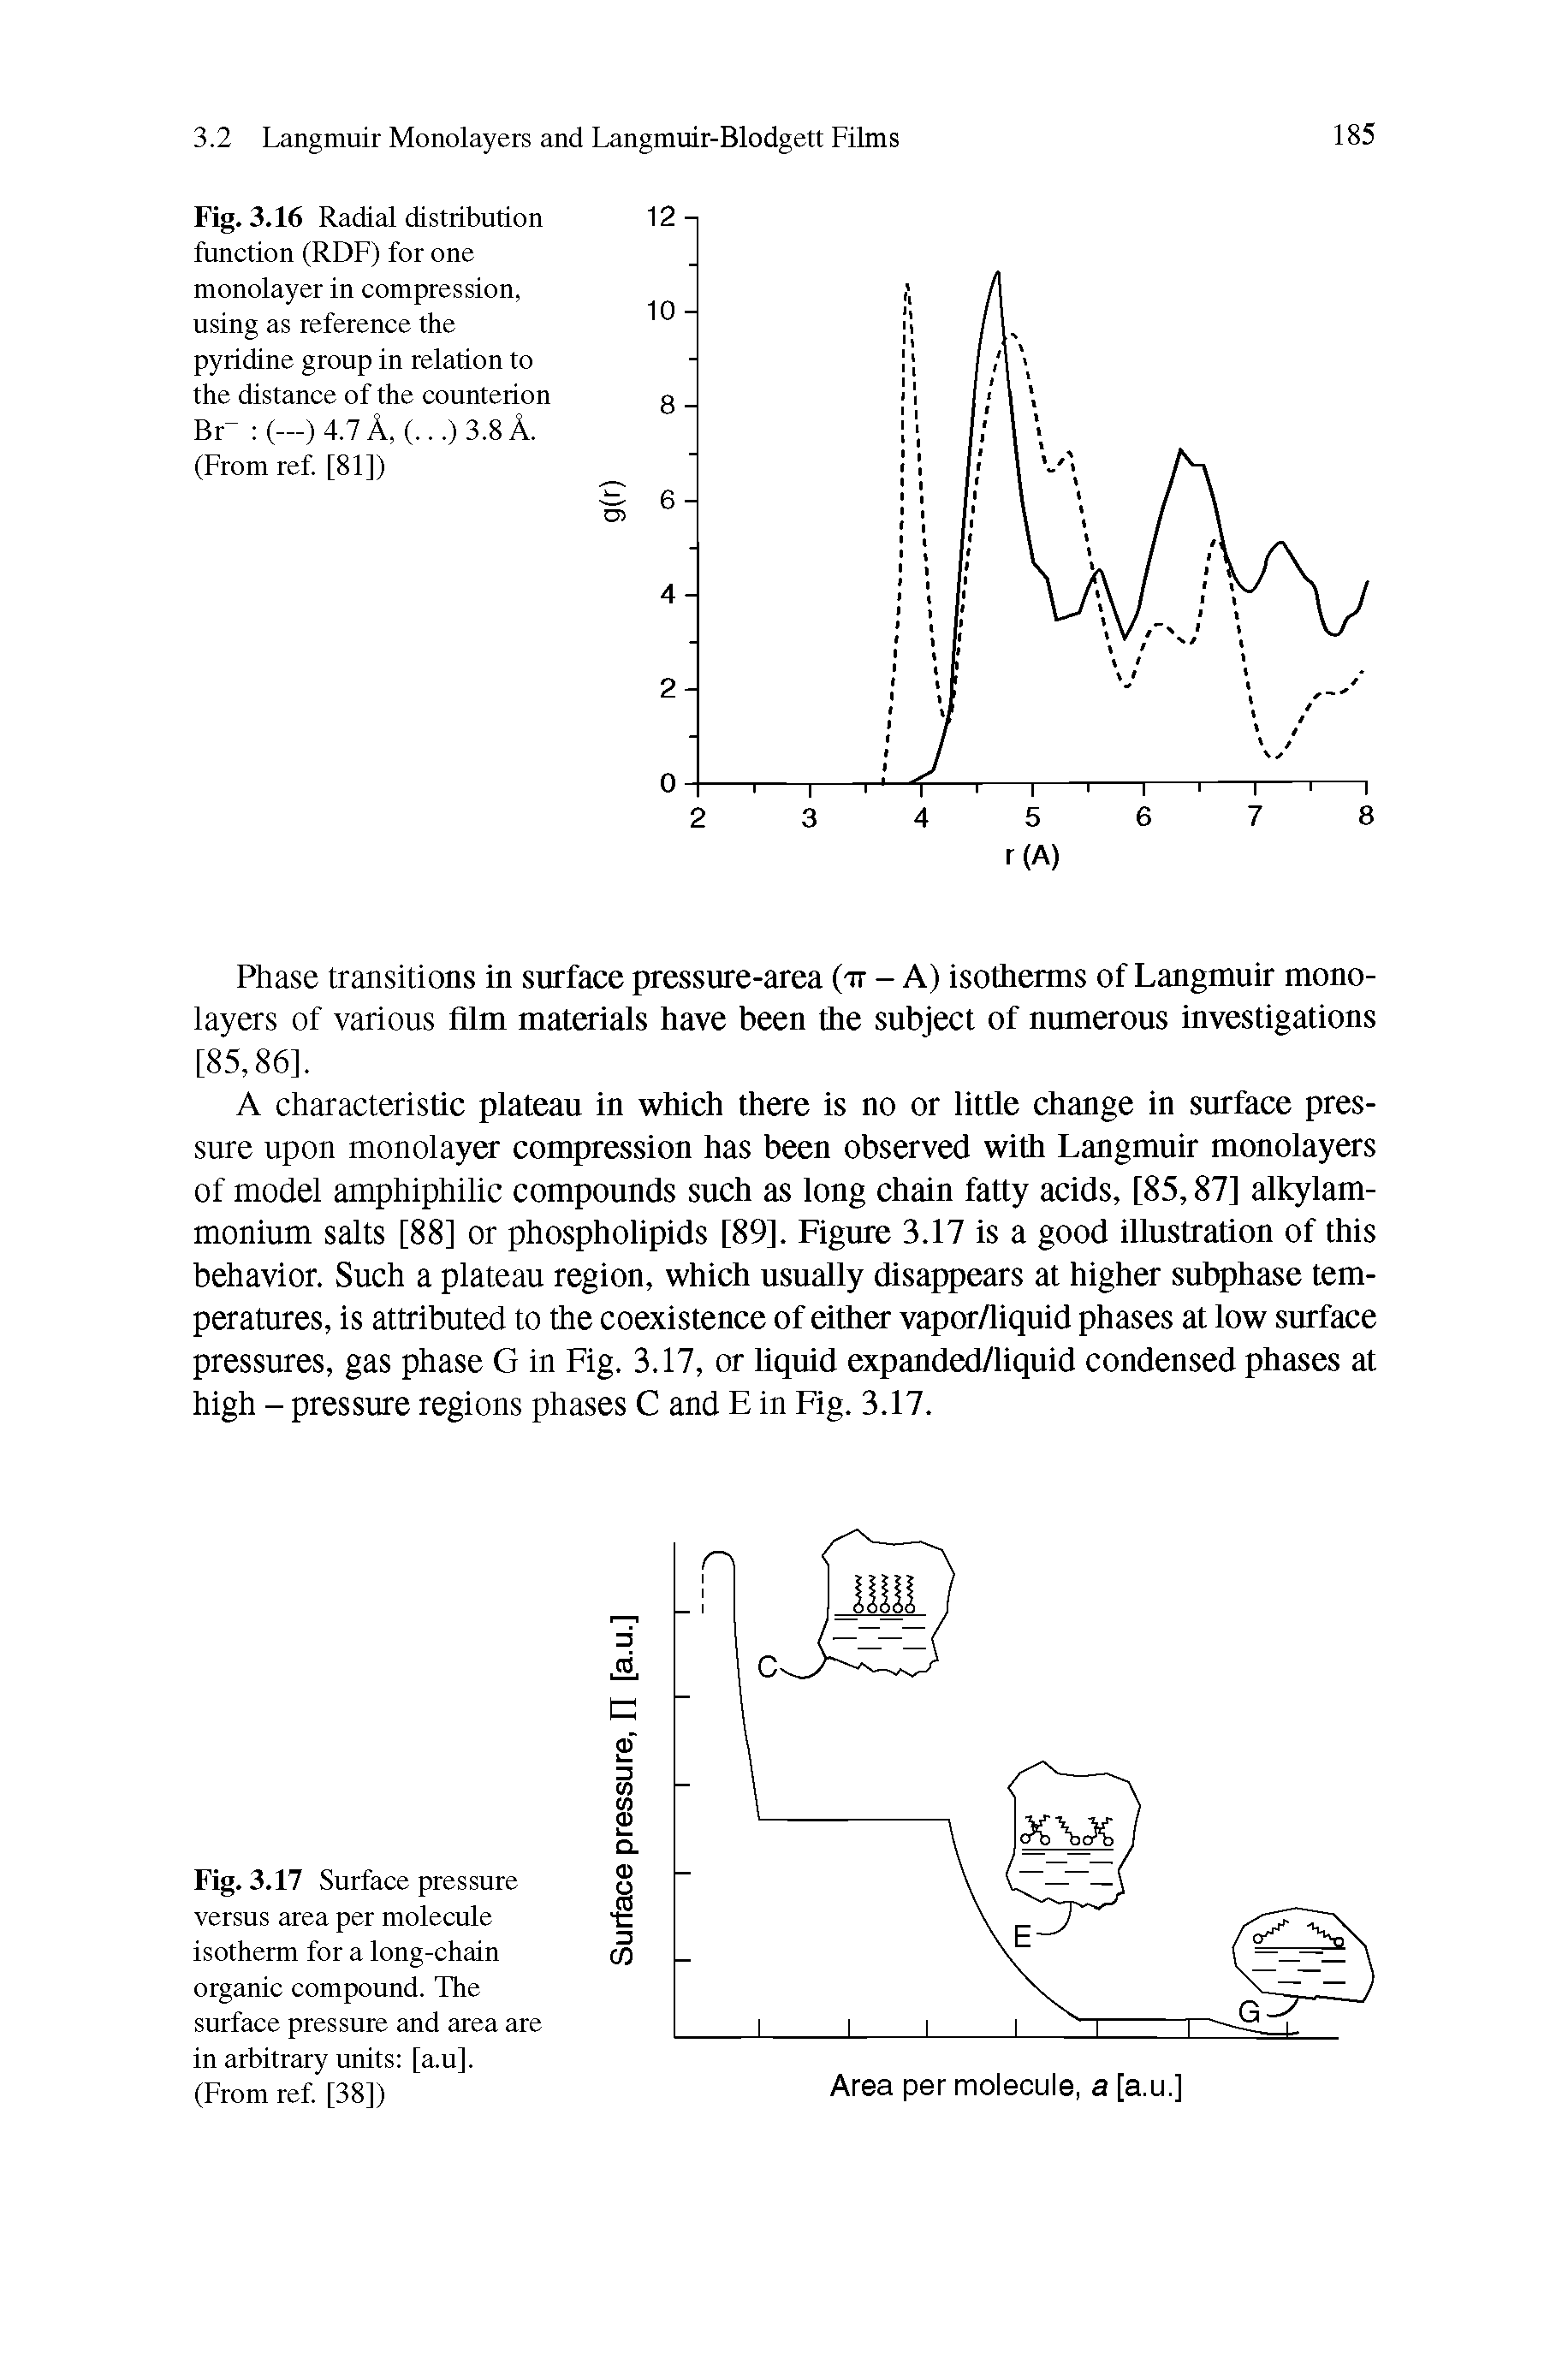 Fig. 3.16 Radial distribution function (RDF) for one monolayer in compression, using as reference the pyridine group in relation to the distance of the counterion Br (—) 4.7 A, (,..)3.8A. (From ref. [81])...